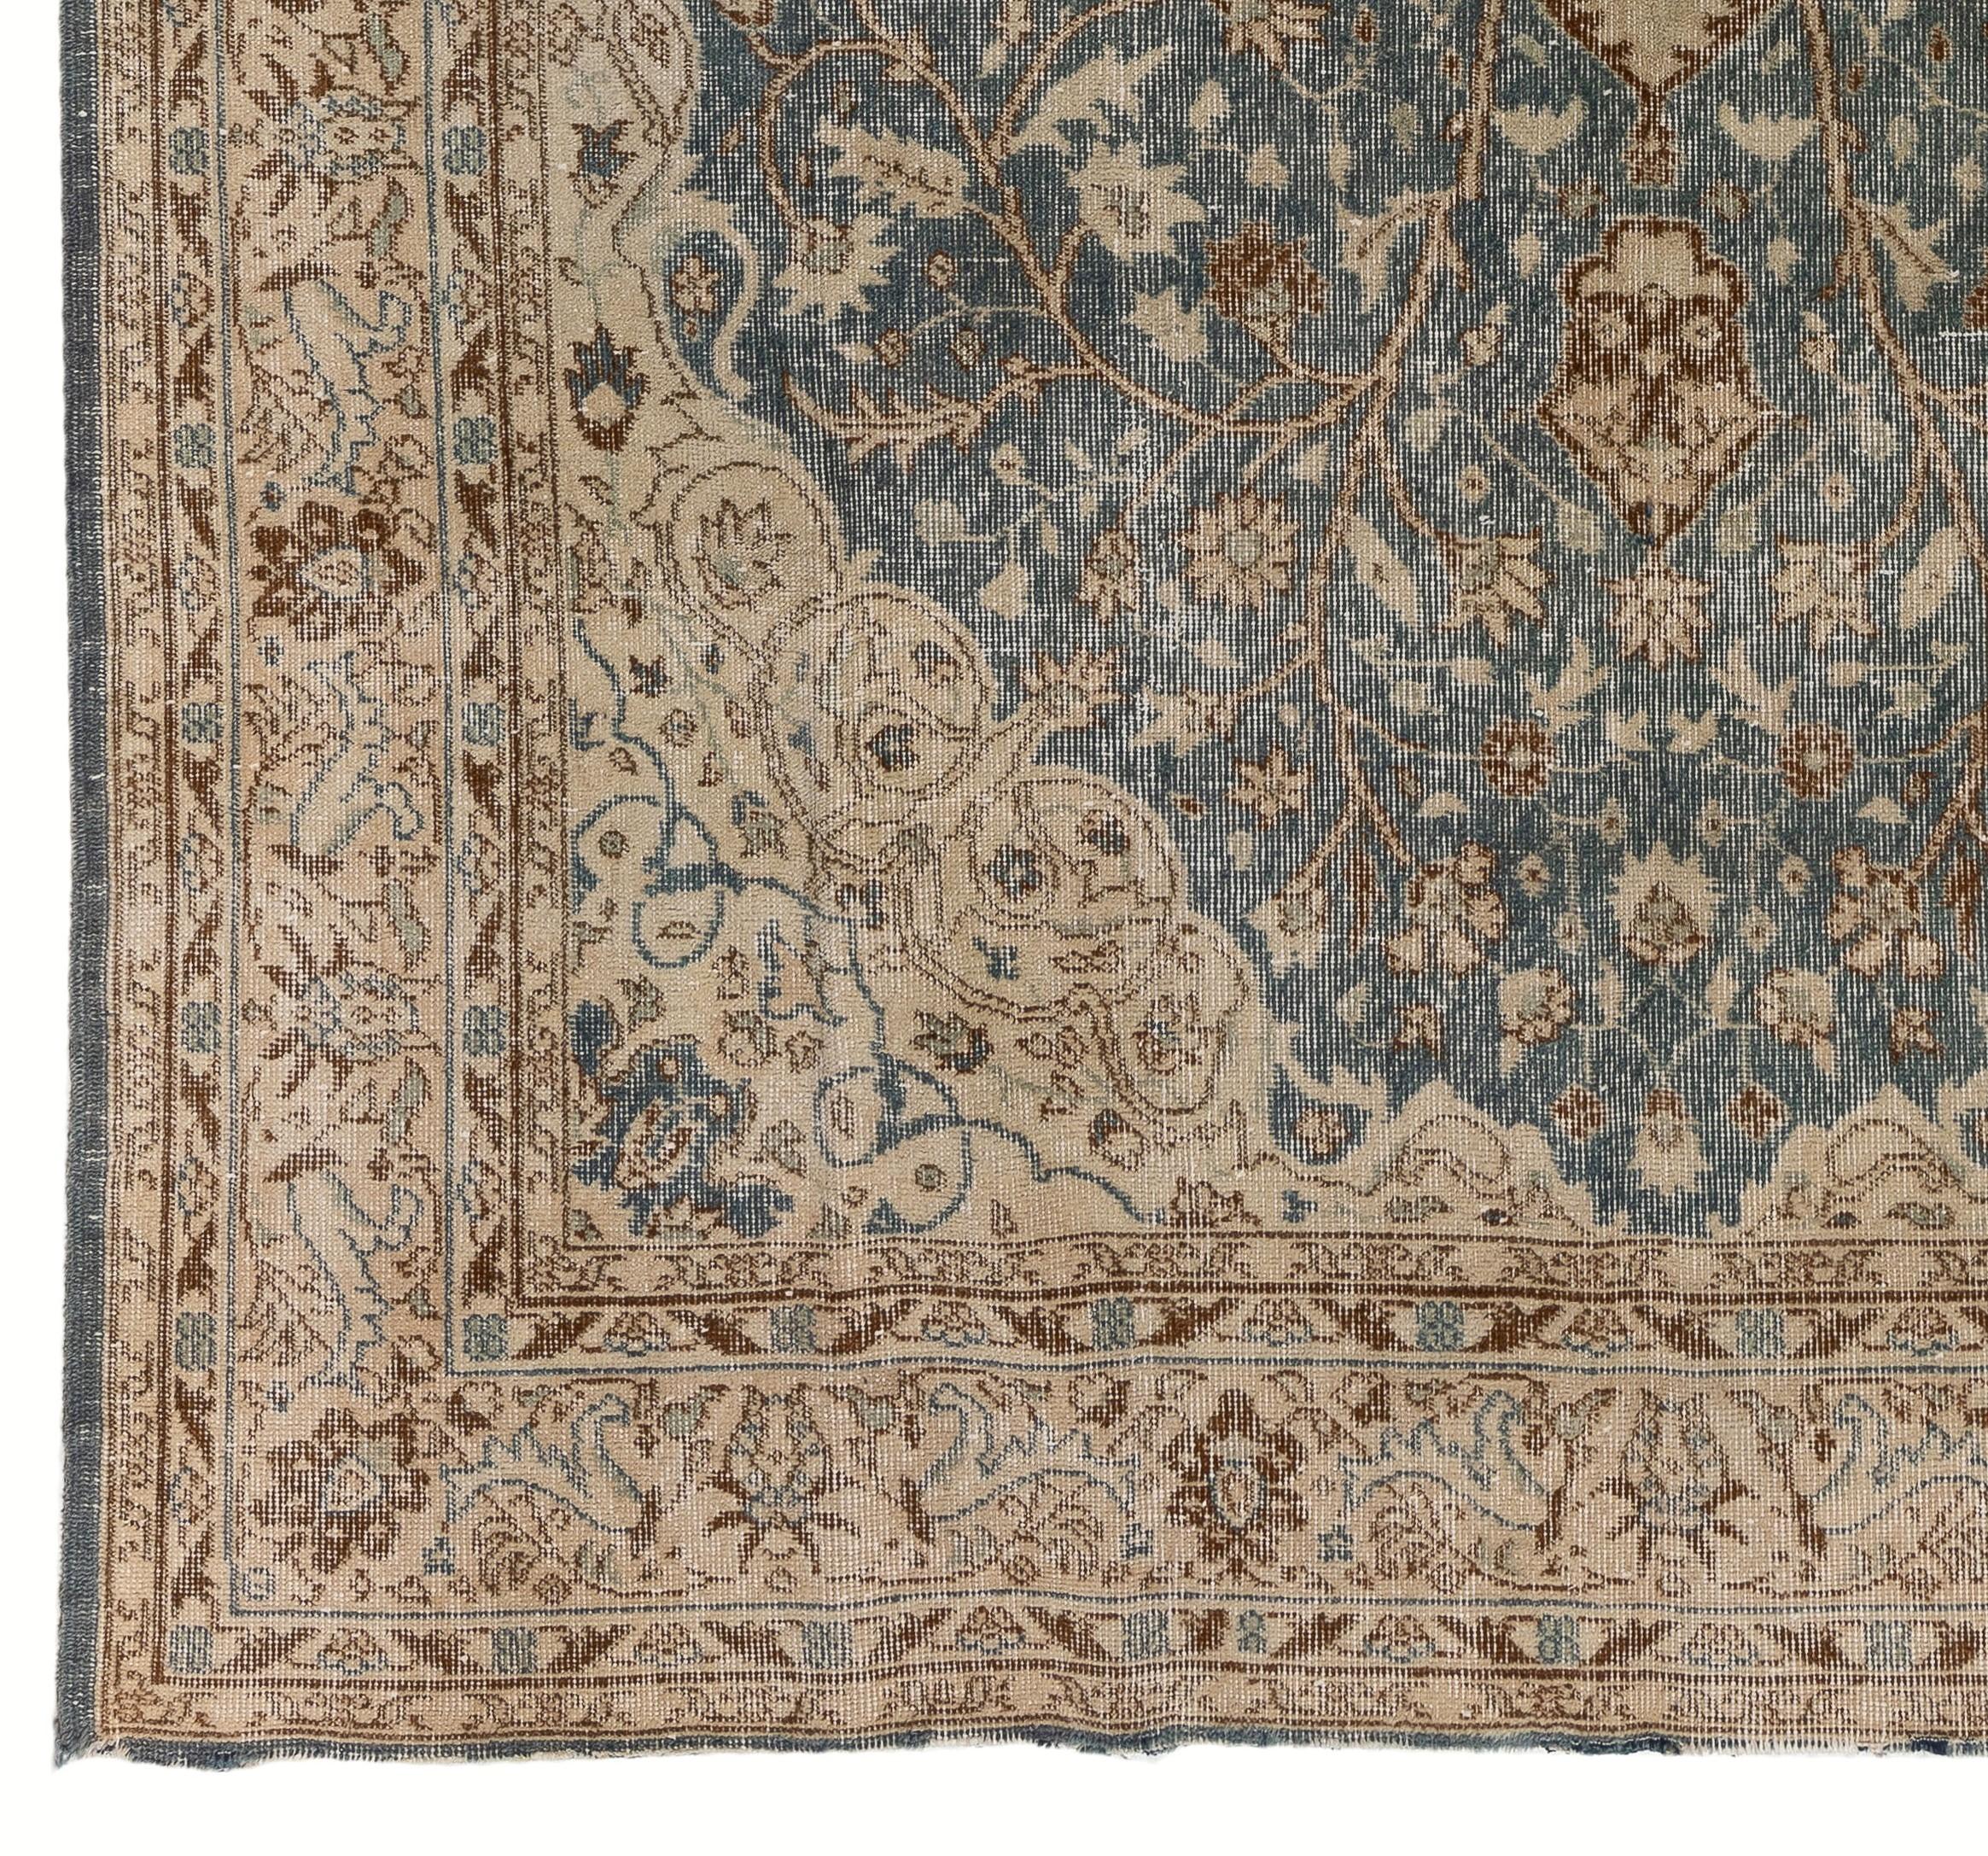 A finely hand knotted vintage rug from Turkey in a soft, faded color palette of navy blue, peach, beige, taupe, aqua and mint green. Measures: 7 x 10 Ft.
Low wool pile on cotton foundation featuring a medallion at the center surrounded by